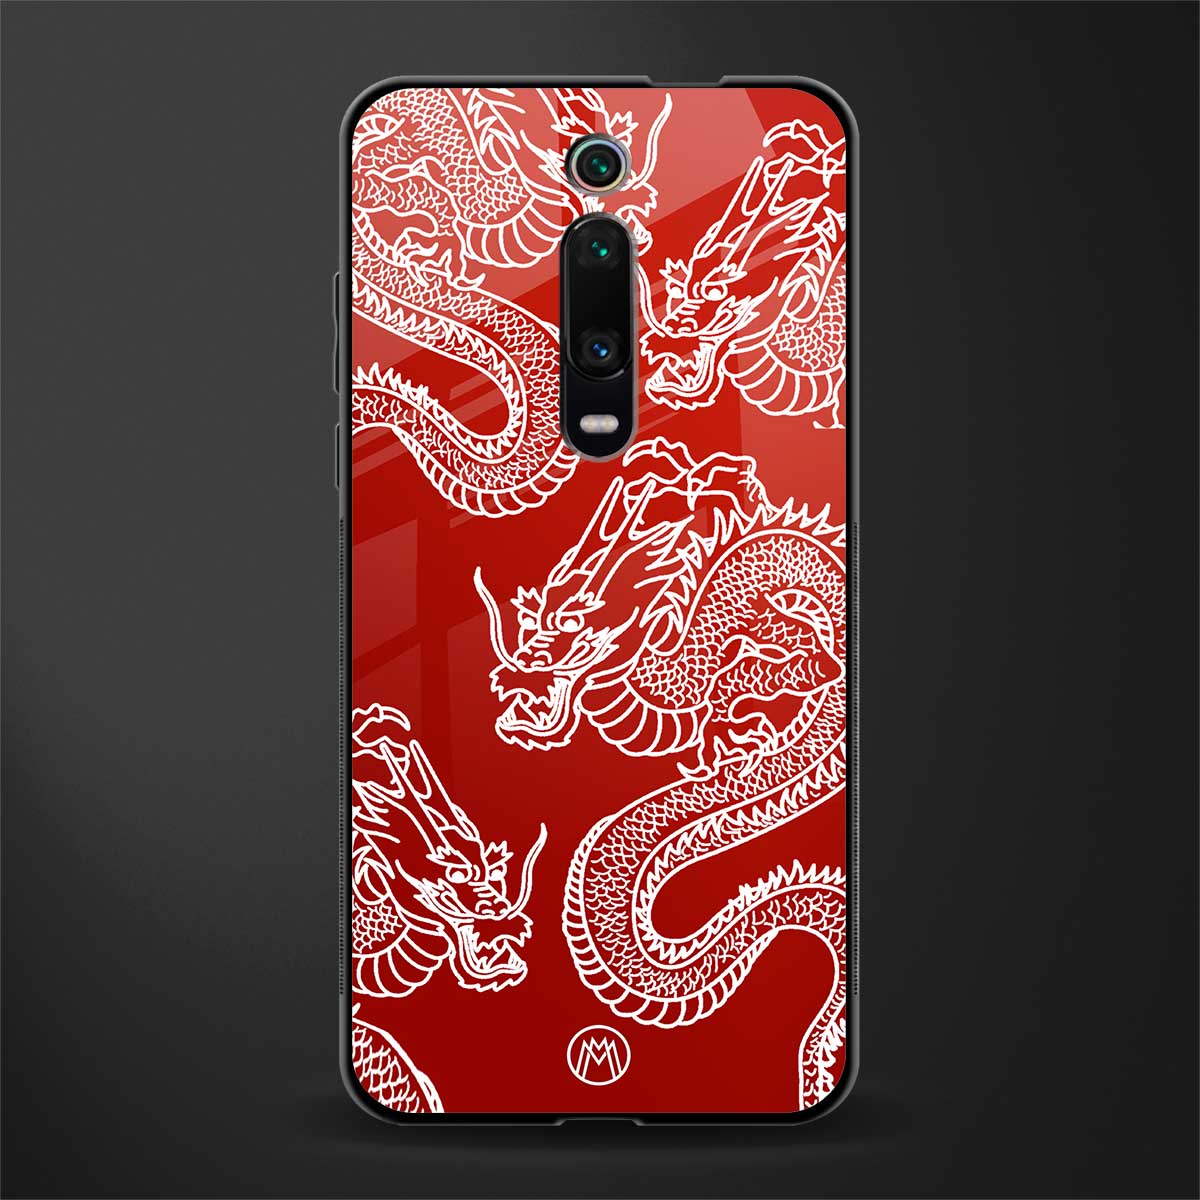 dragons red glass case for redmi k20 pro image